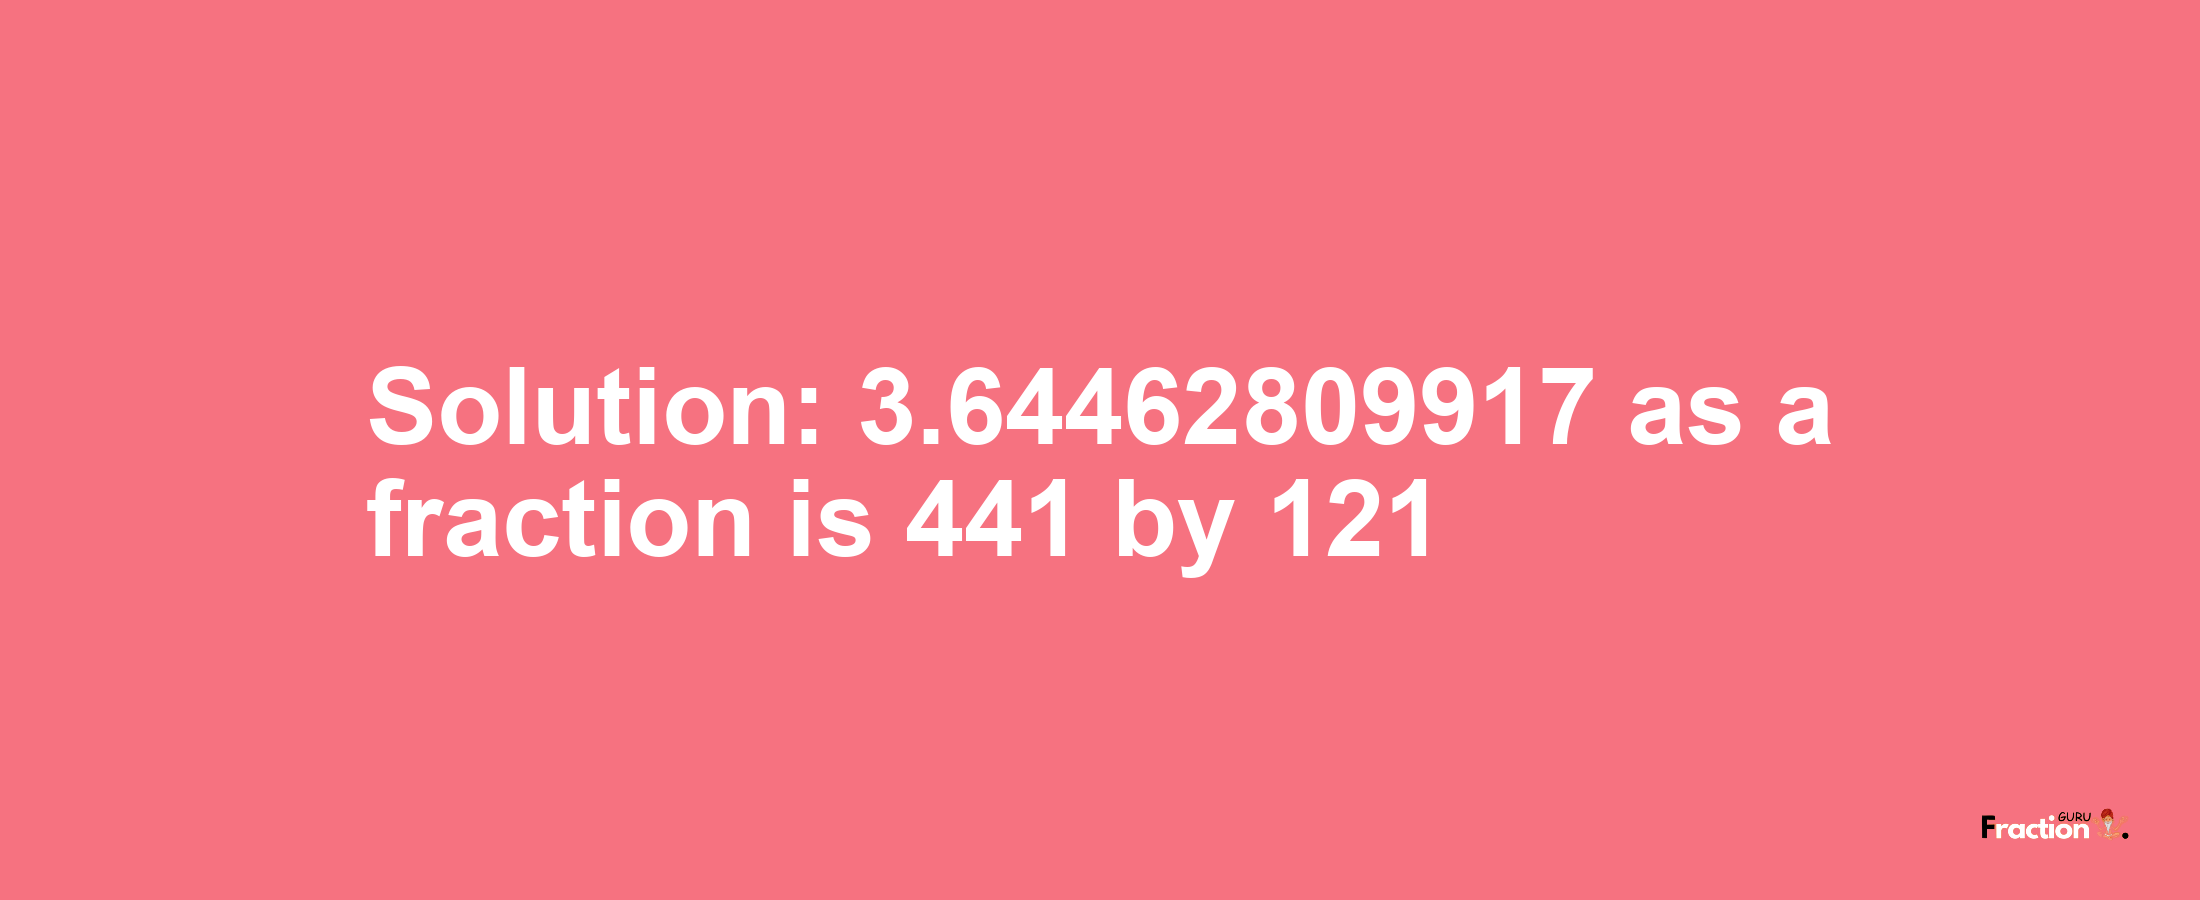 Solution:3.64462809917 as a fraction is 441/121